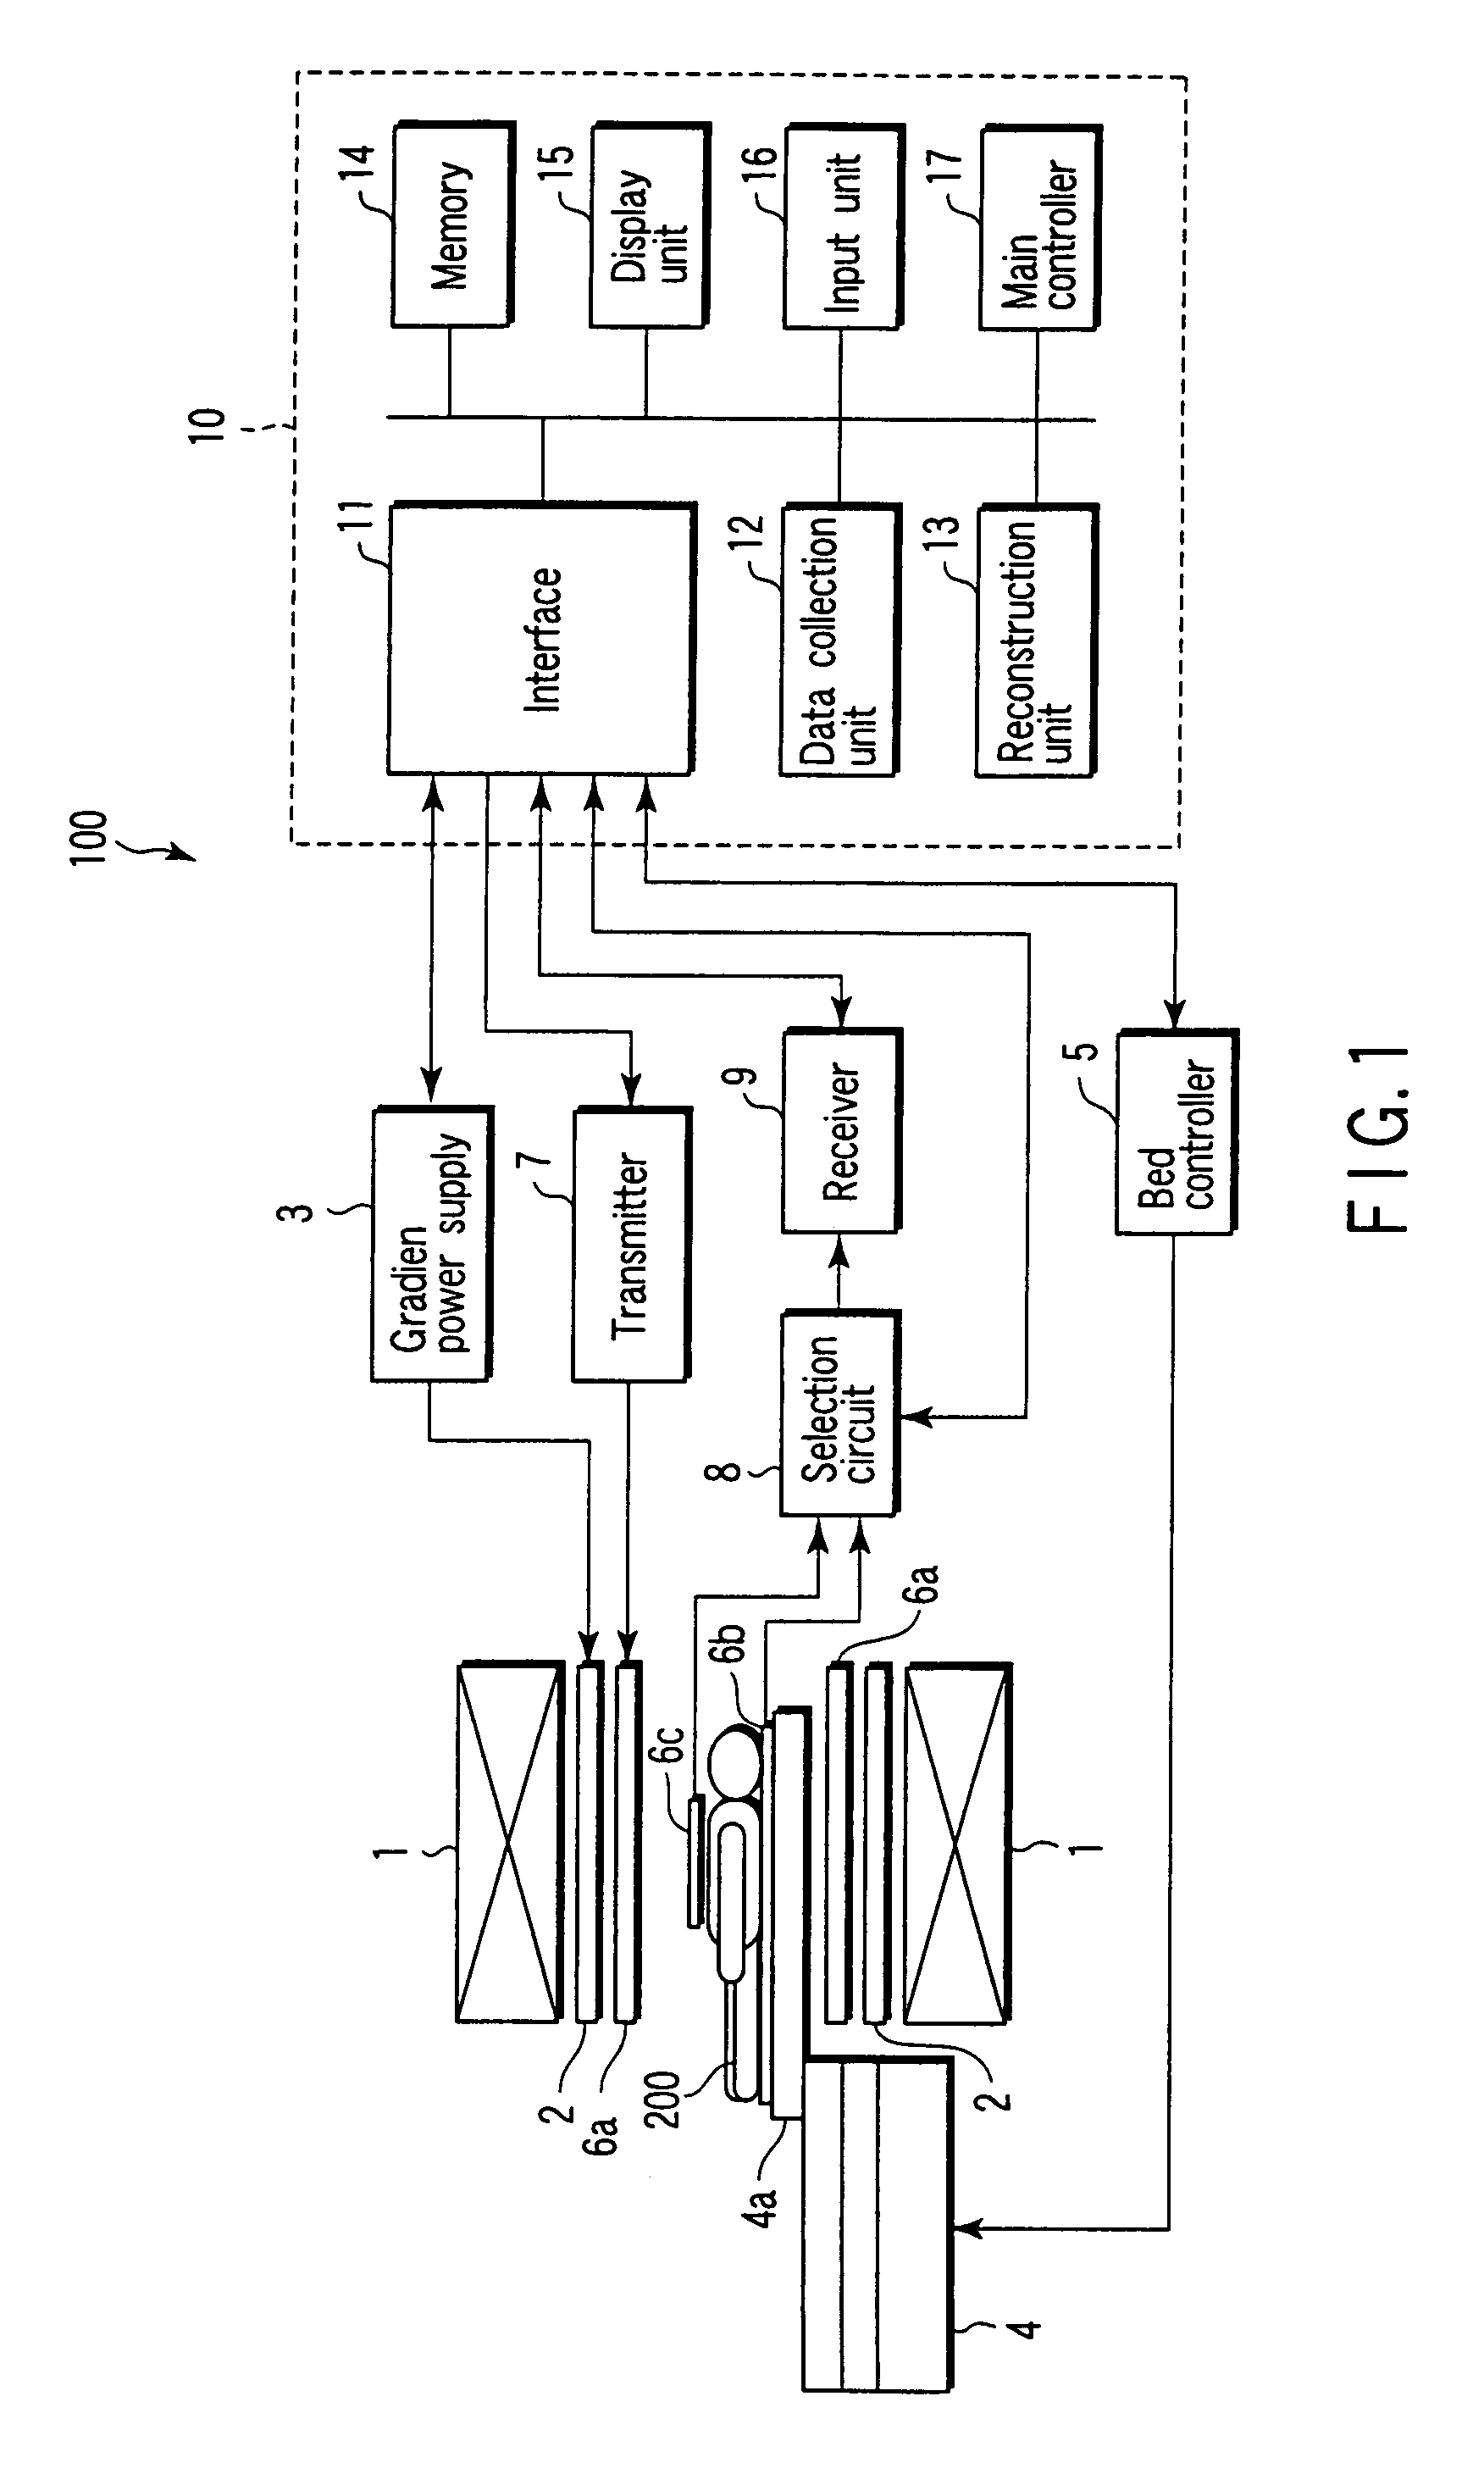 MRI apparatus, method and process generating diffusion weighted images using apparent diffusion coefficients and threshold values